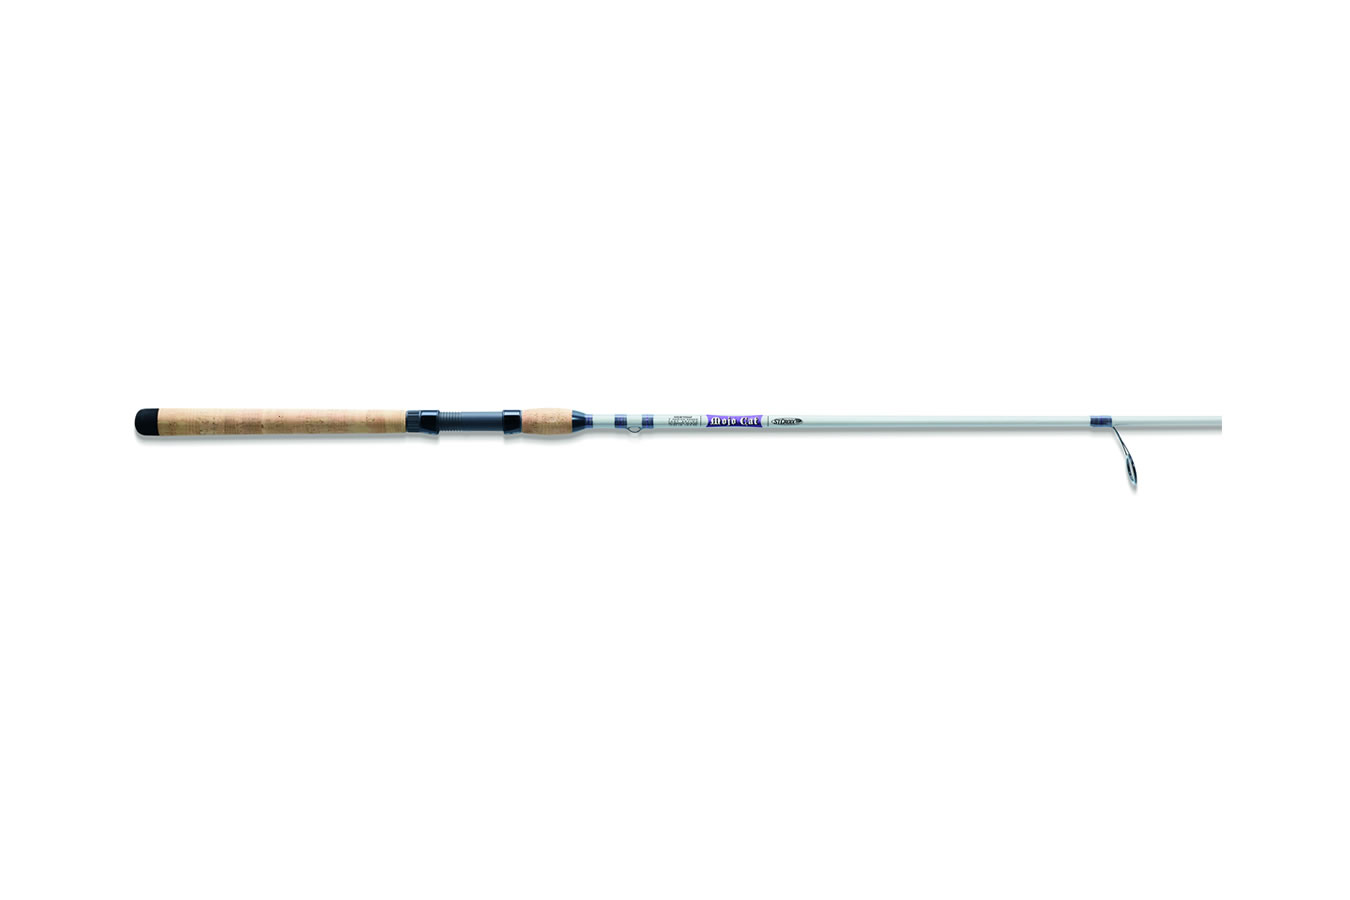 Discount St Croix Mojo Cat 7 ft - Medium Spinning Rod for Sale, Online Fishing  Rods Store